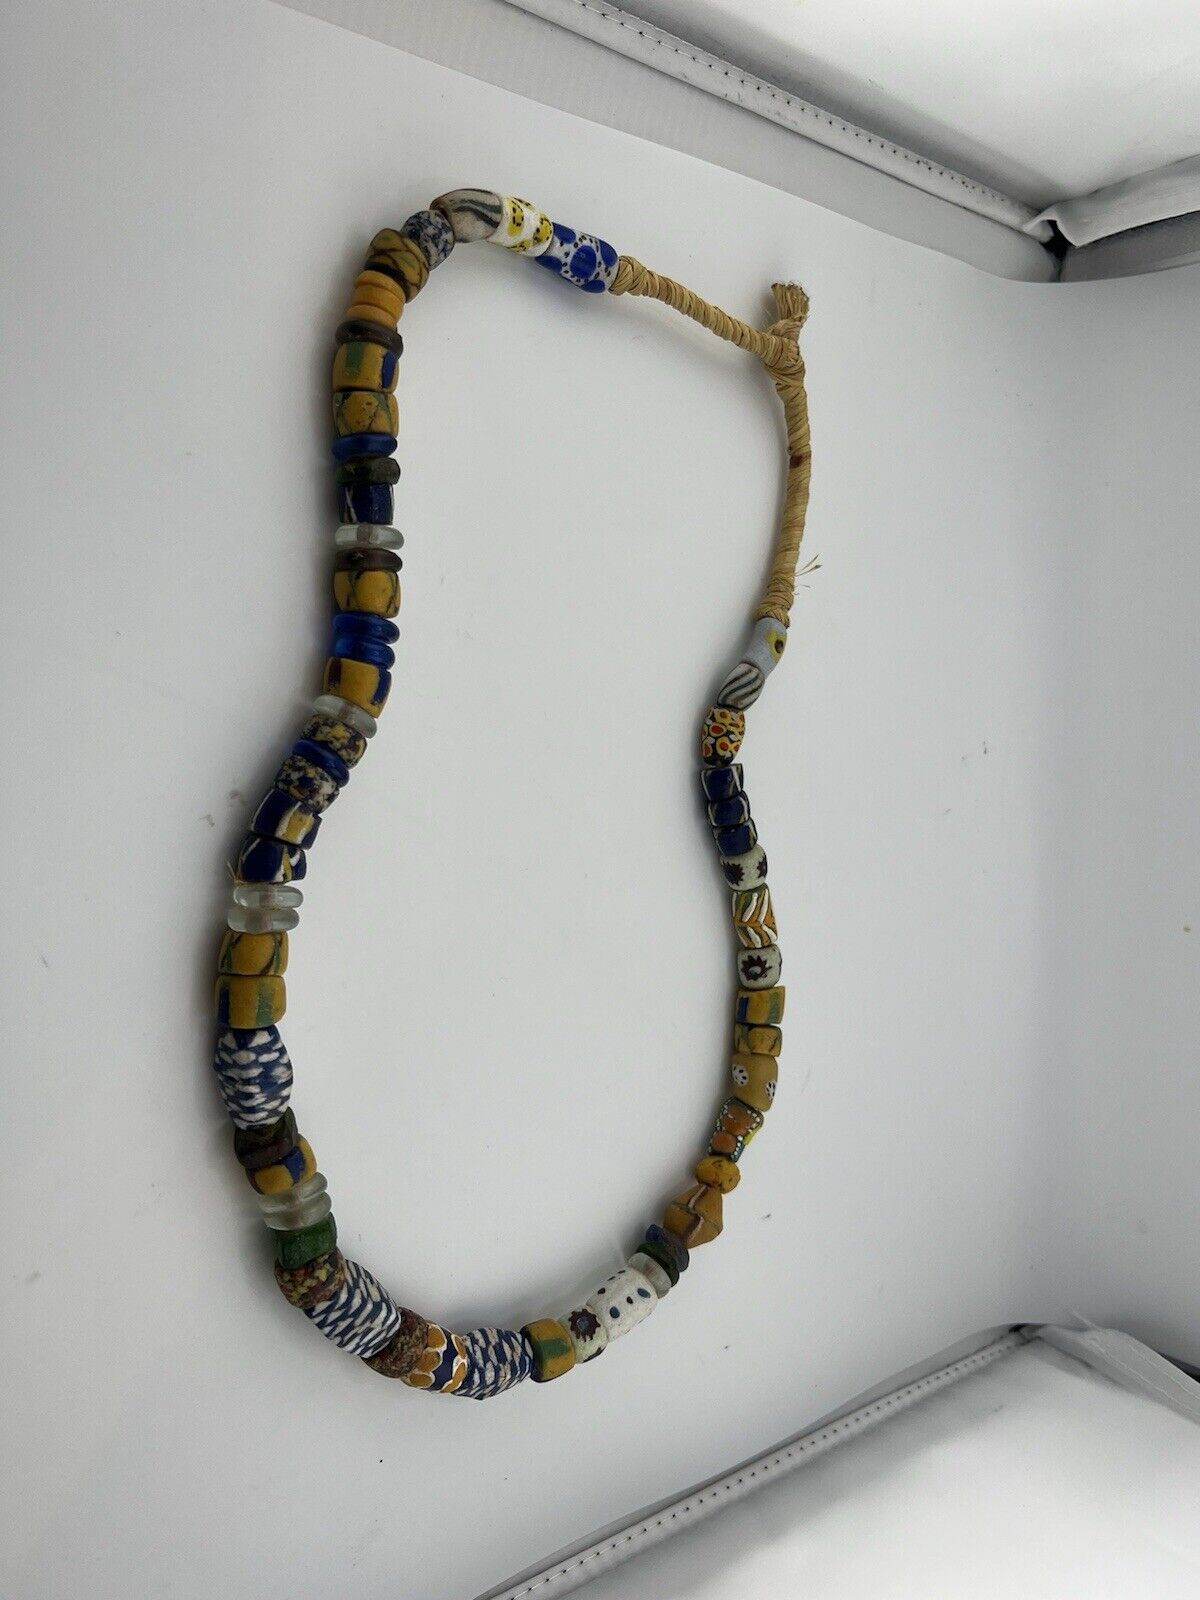 Vintage African Italian Trade Bead Necklace Beads Large Very Colorful And Unique